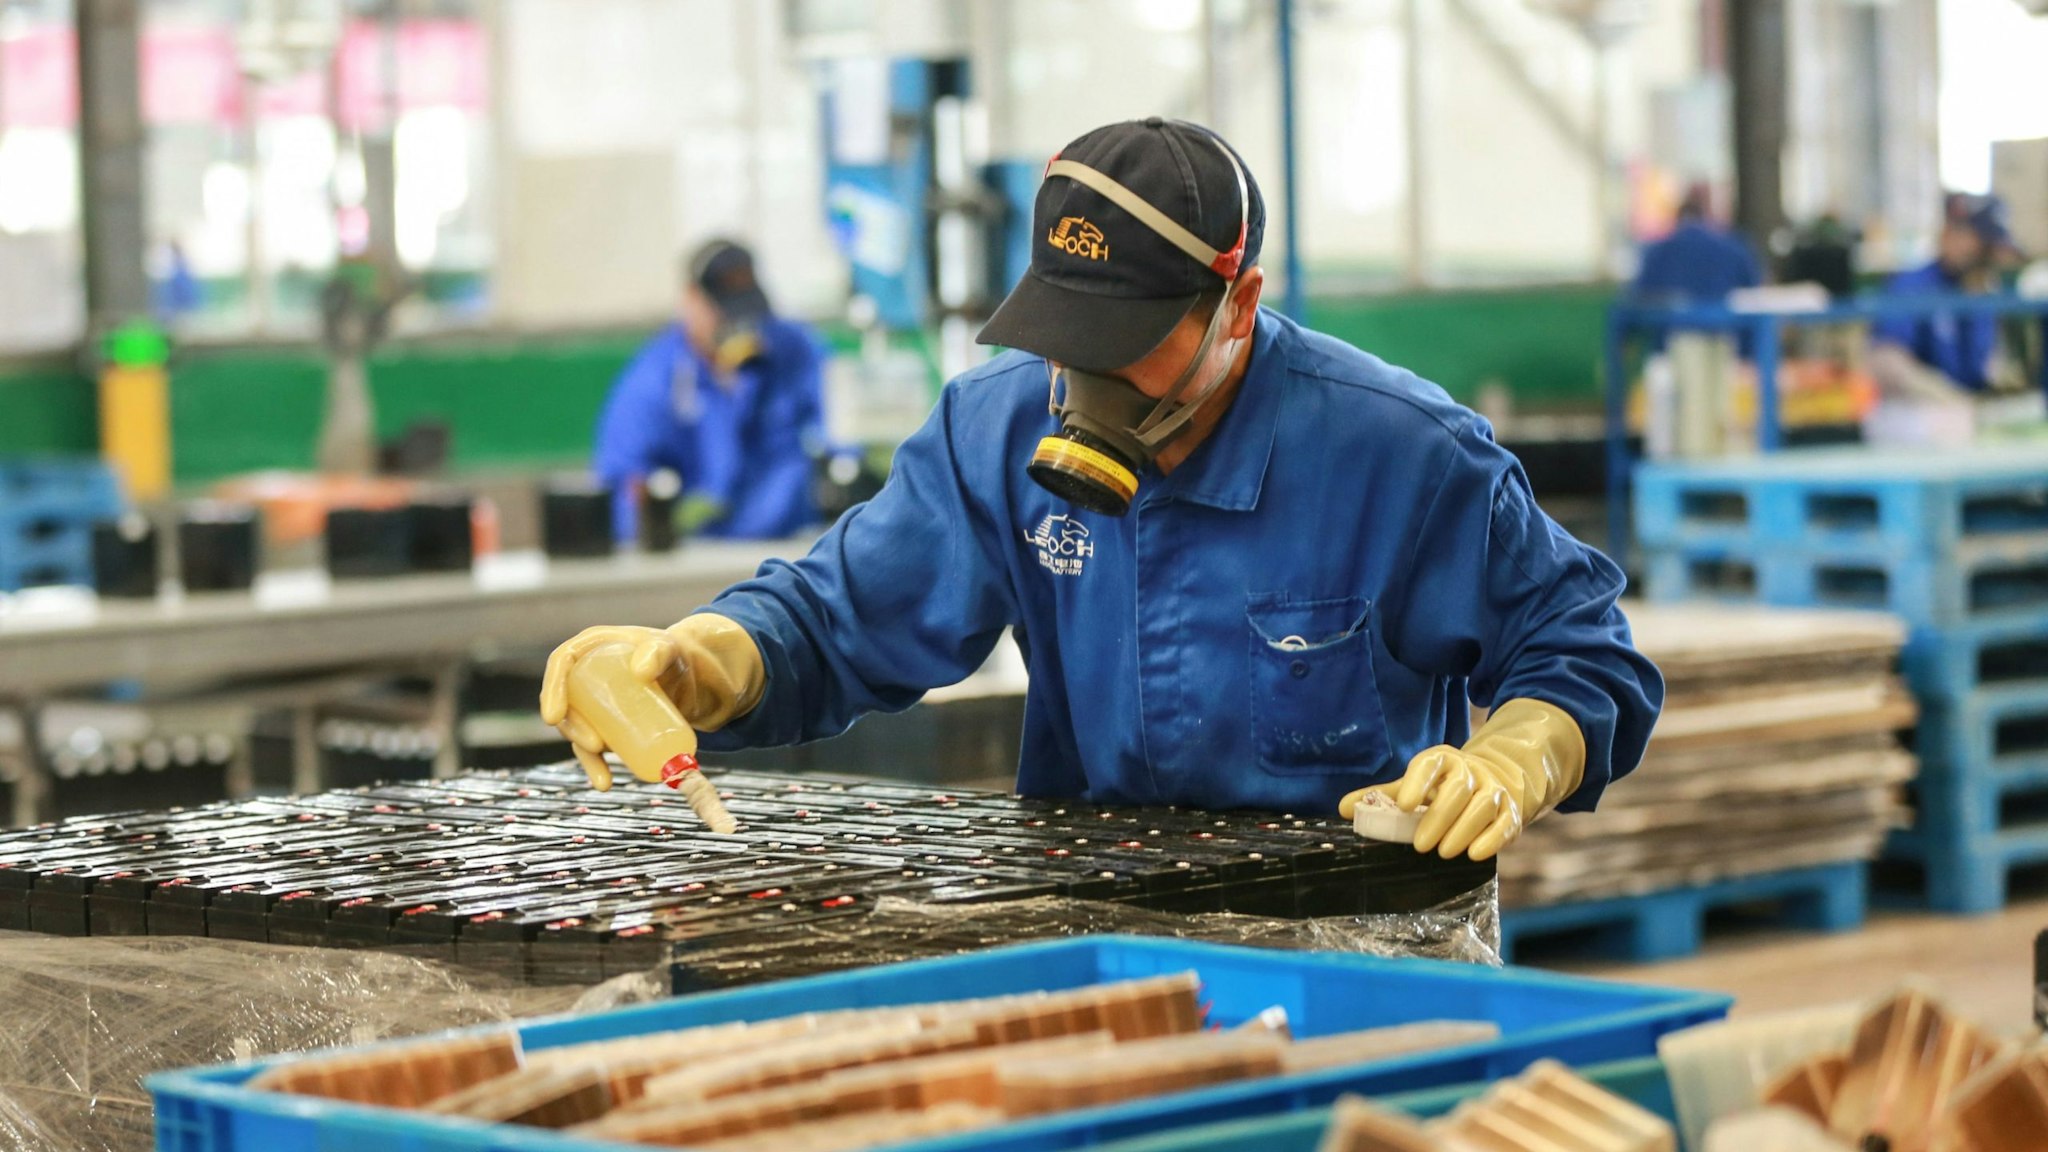 This photo taken on March 30, 2020 shows employees working on a battery production line at a factory in Huaibei in China's eastern Anhui province. - Factory activity in China rebounded in March from a record low, according to official data released on March 31, returning to expansion territory while the coronavirus pandemic continues to devastate the global economy. (Photo by STR / AFP) / China OUT (Photo by STR/AFP via Getty Images)